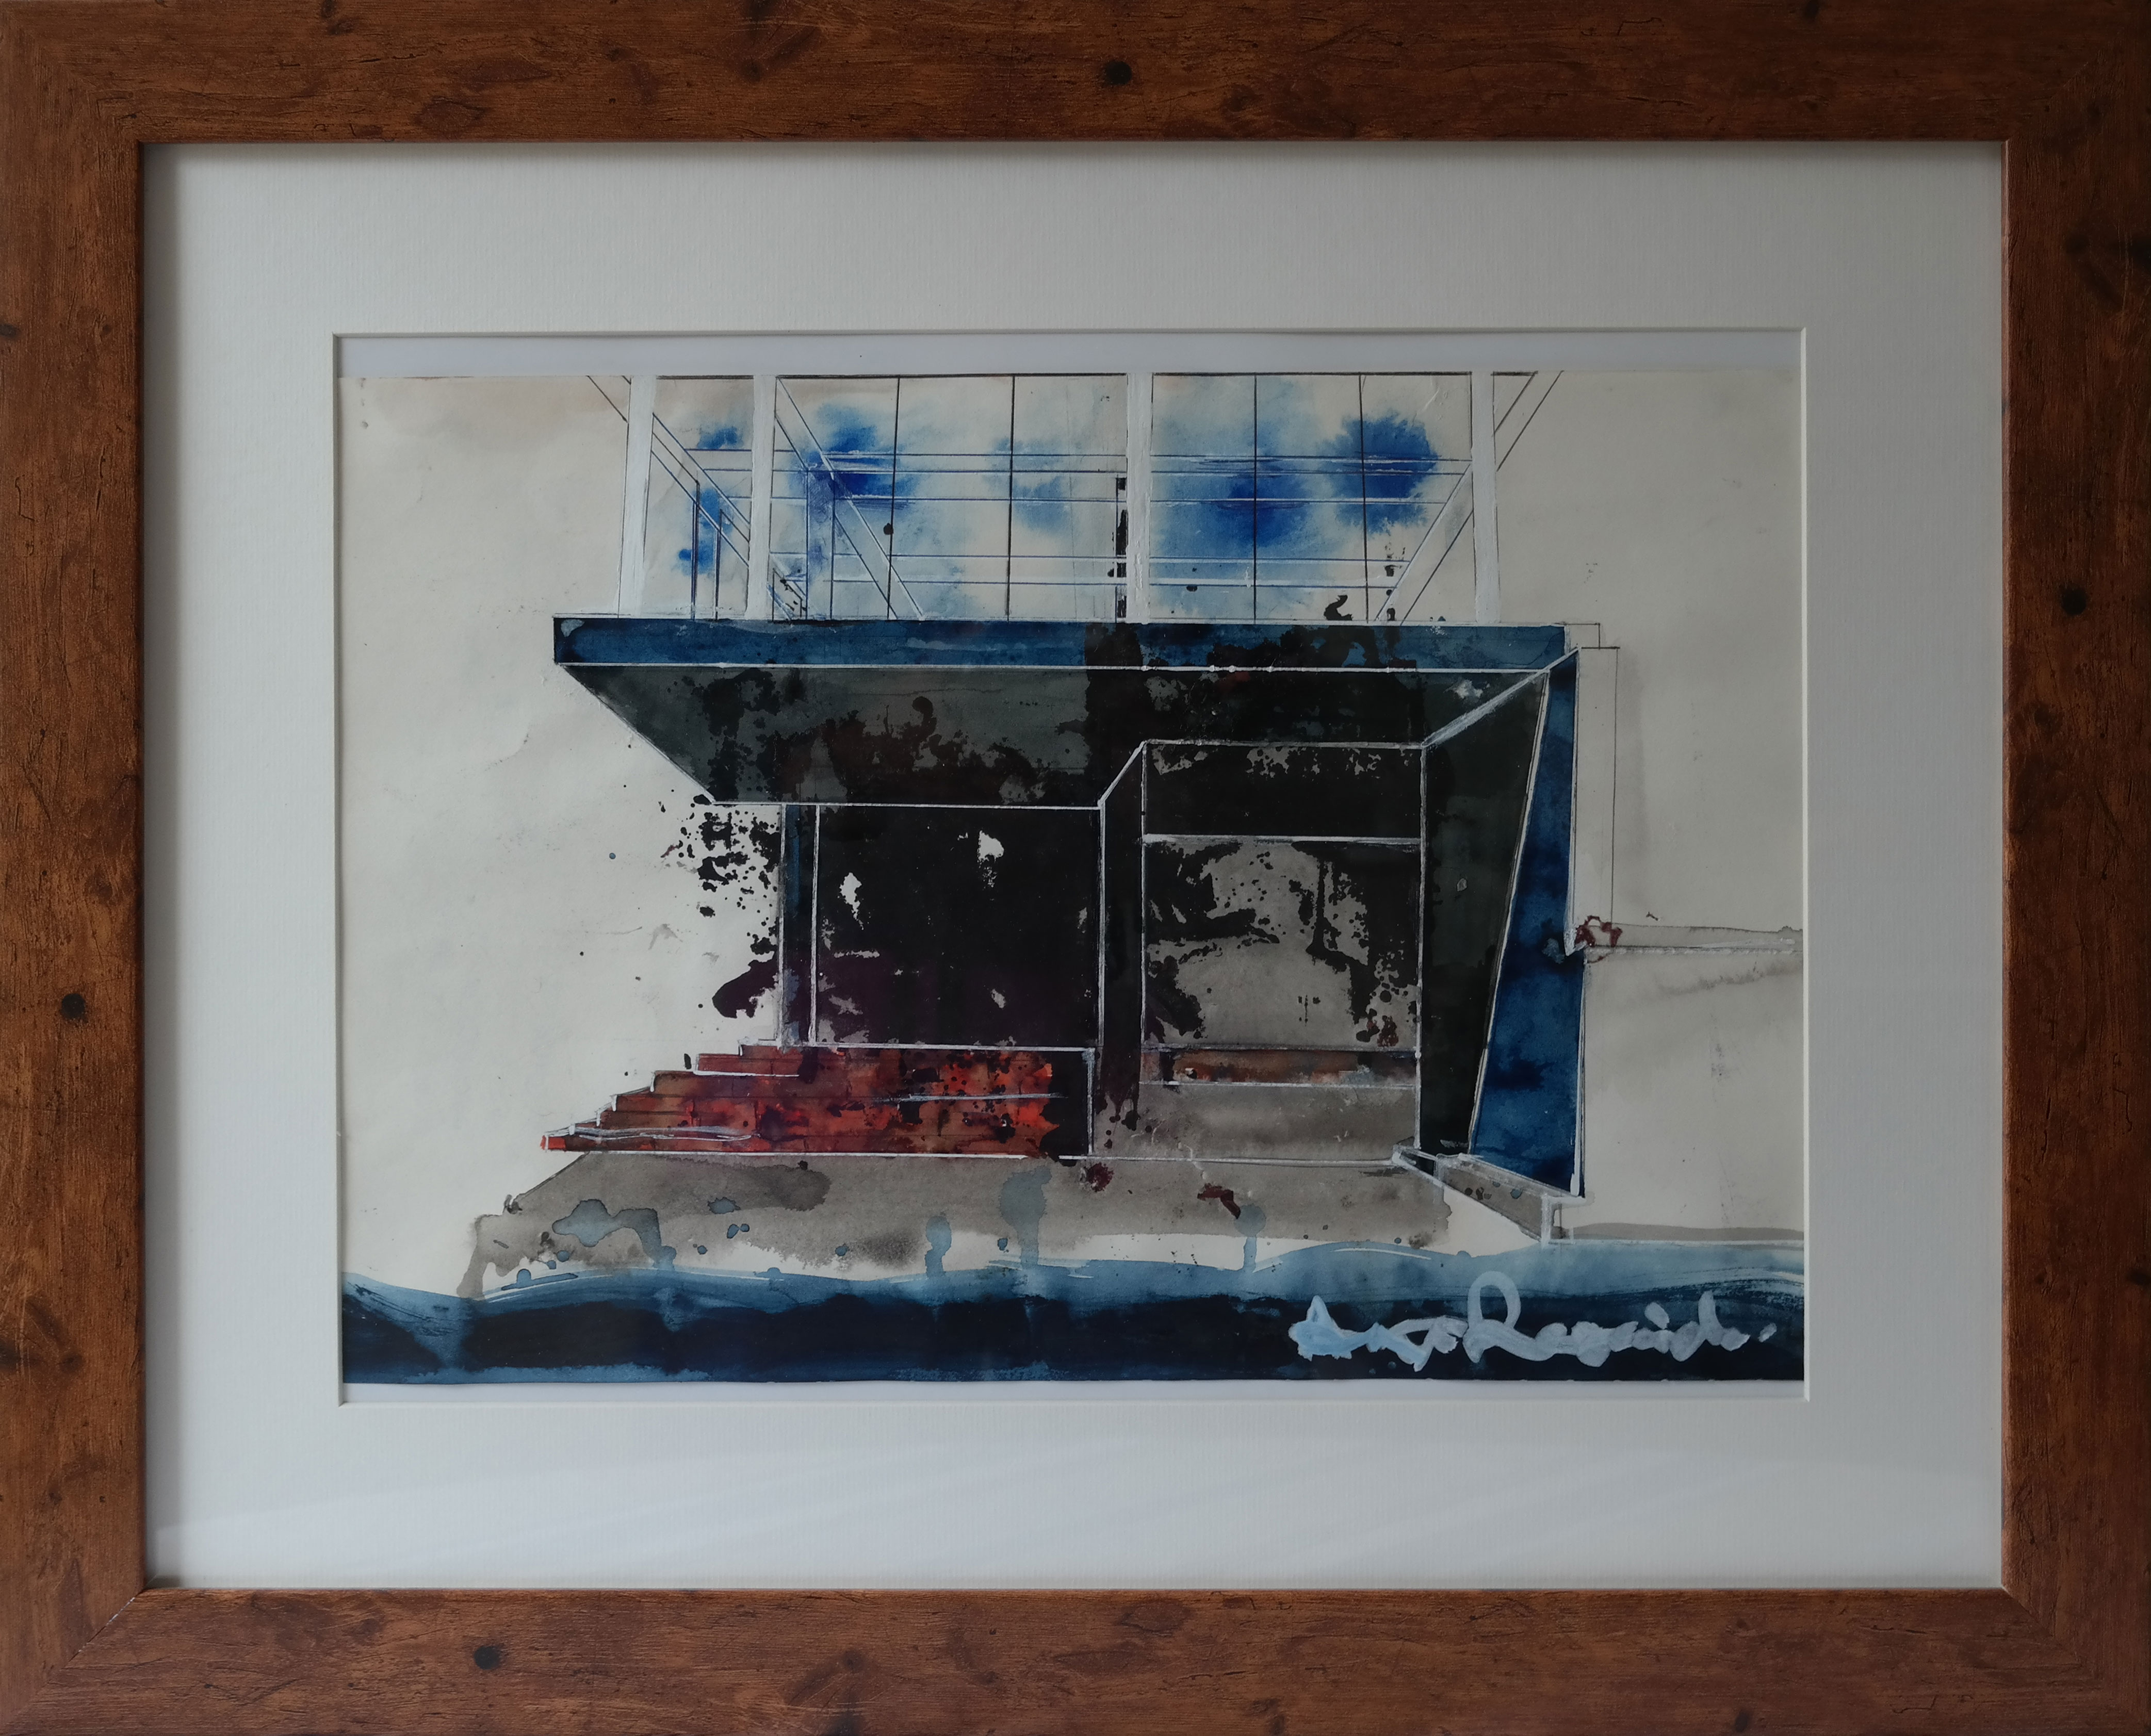 Colombo - Mixed media on paper, 48 x 58cm in frame